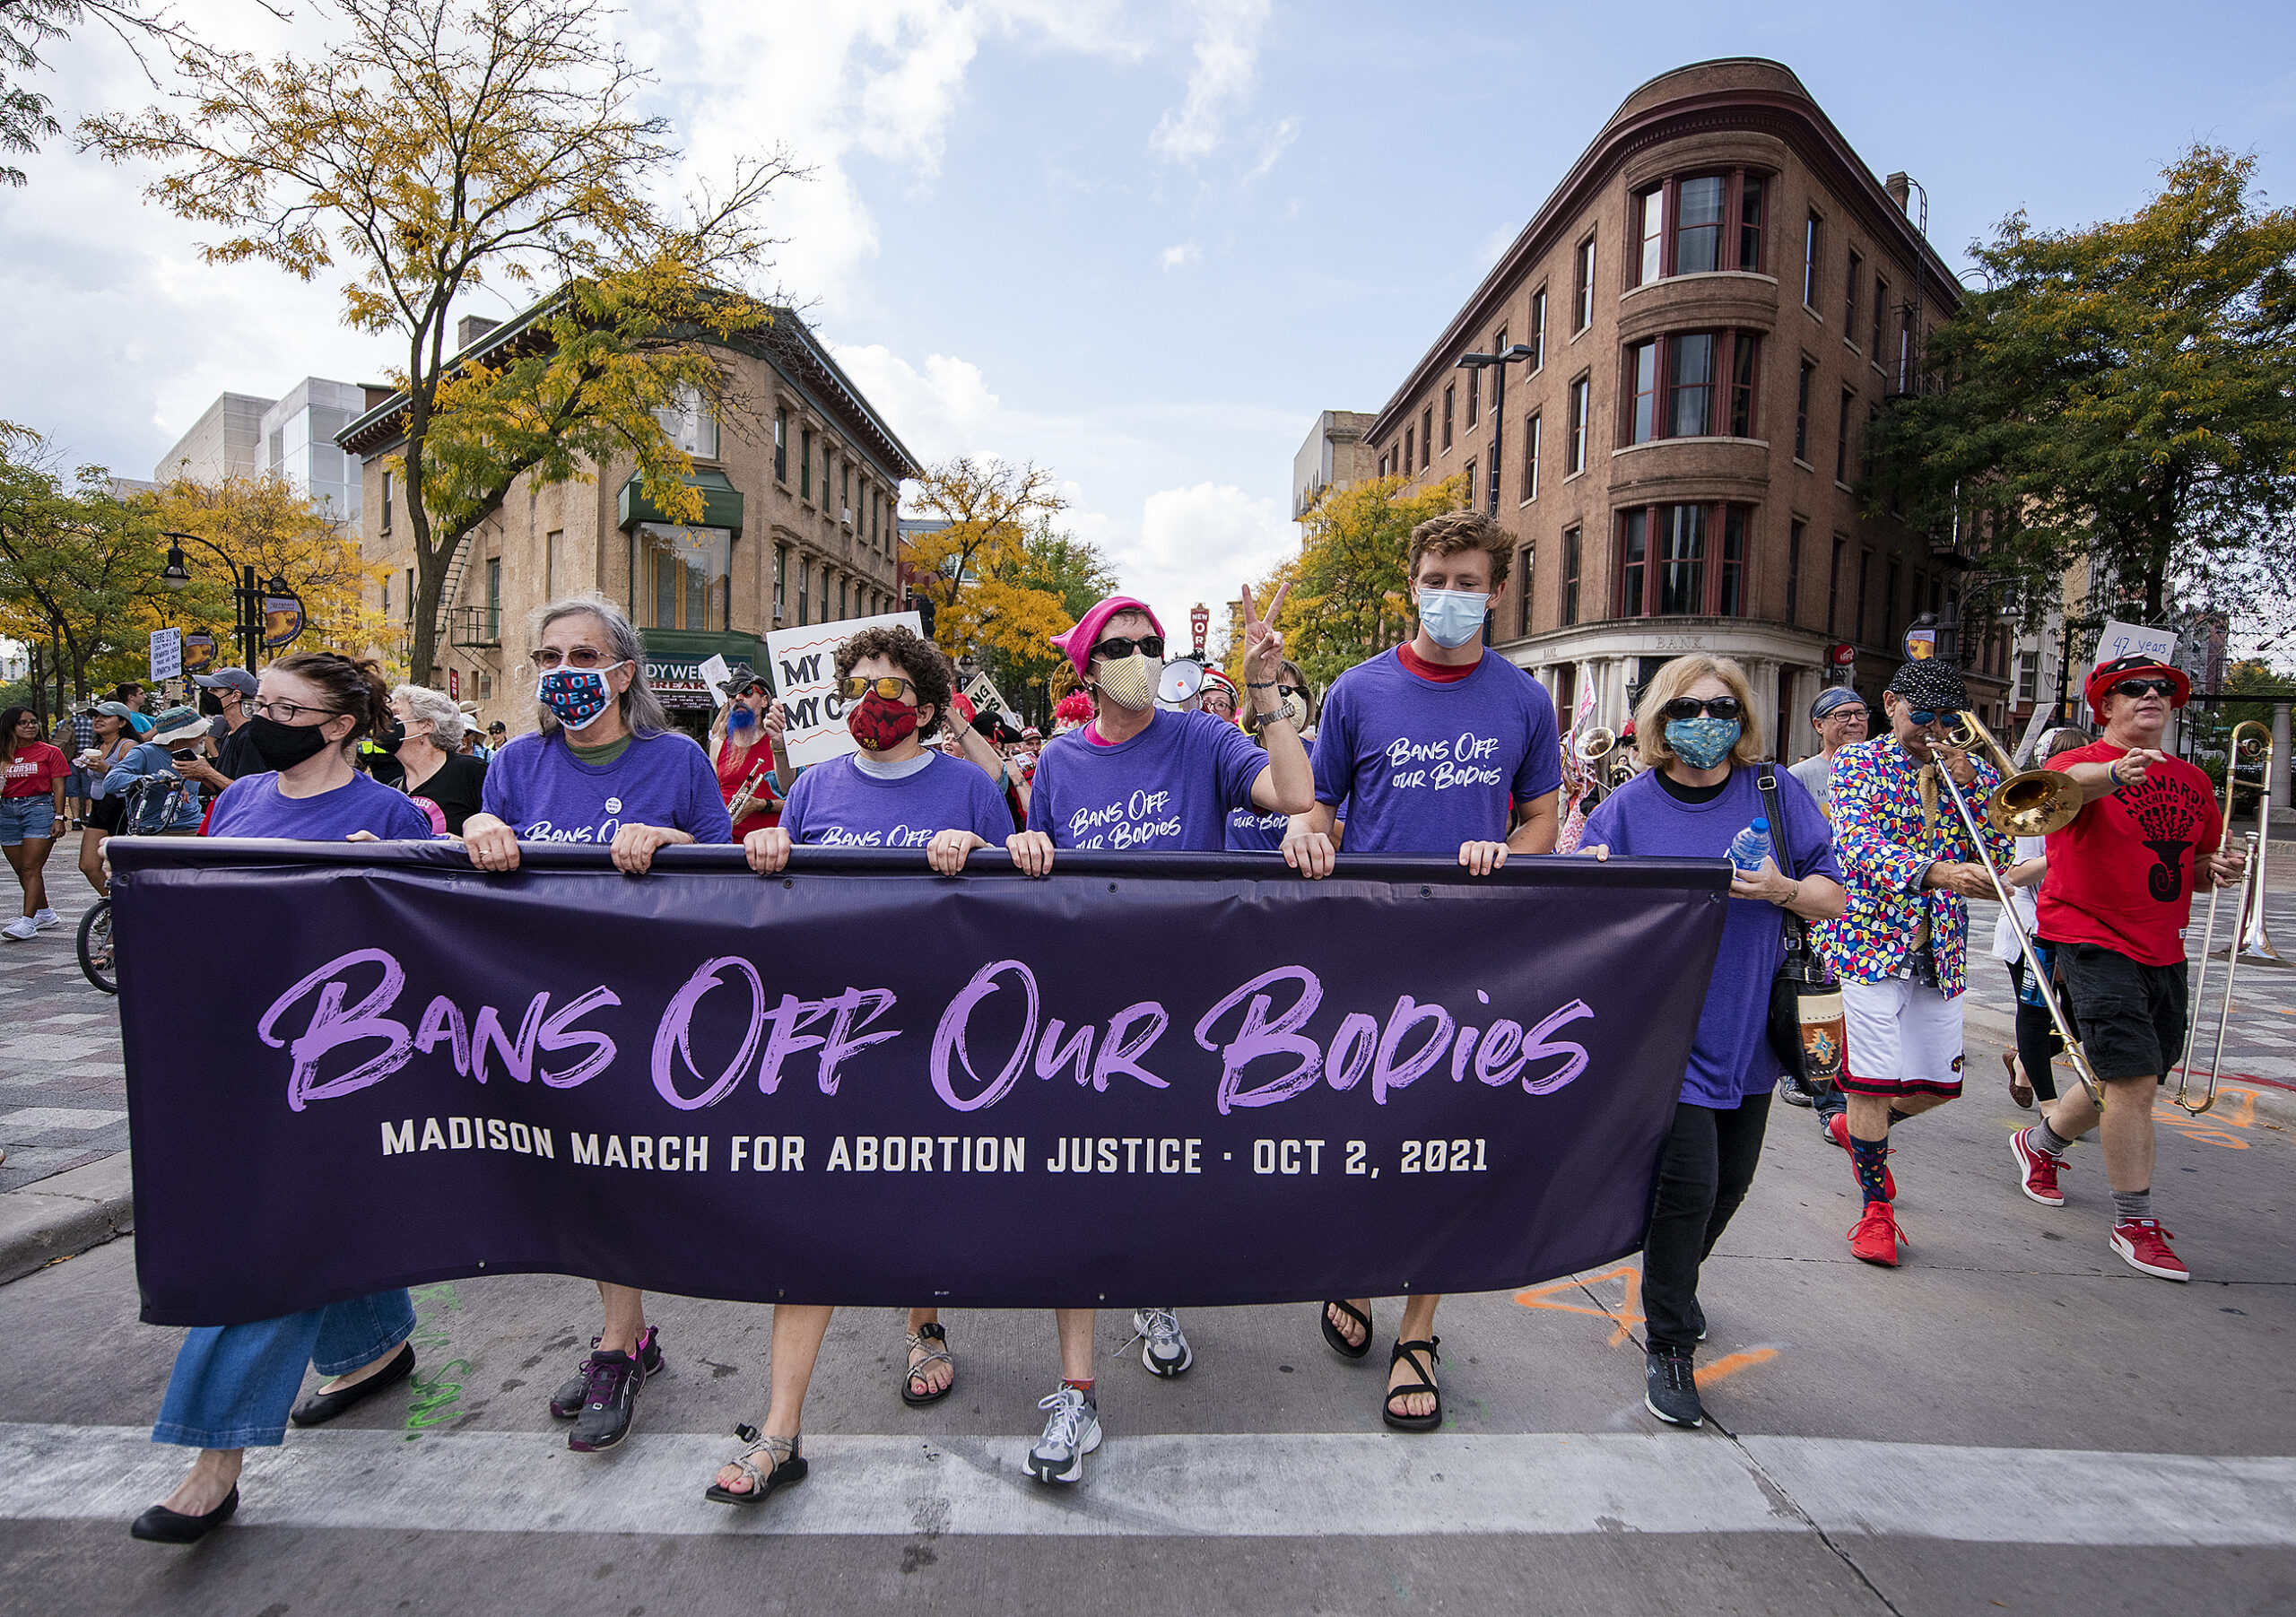 Six people hold a purple banner that says "Bans Off Our Bodies."